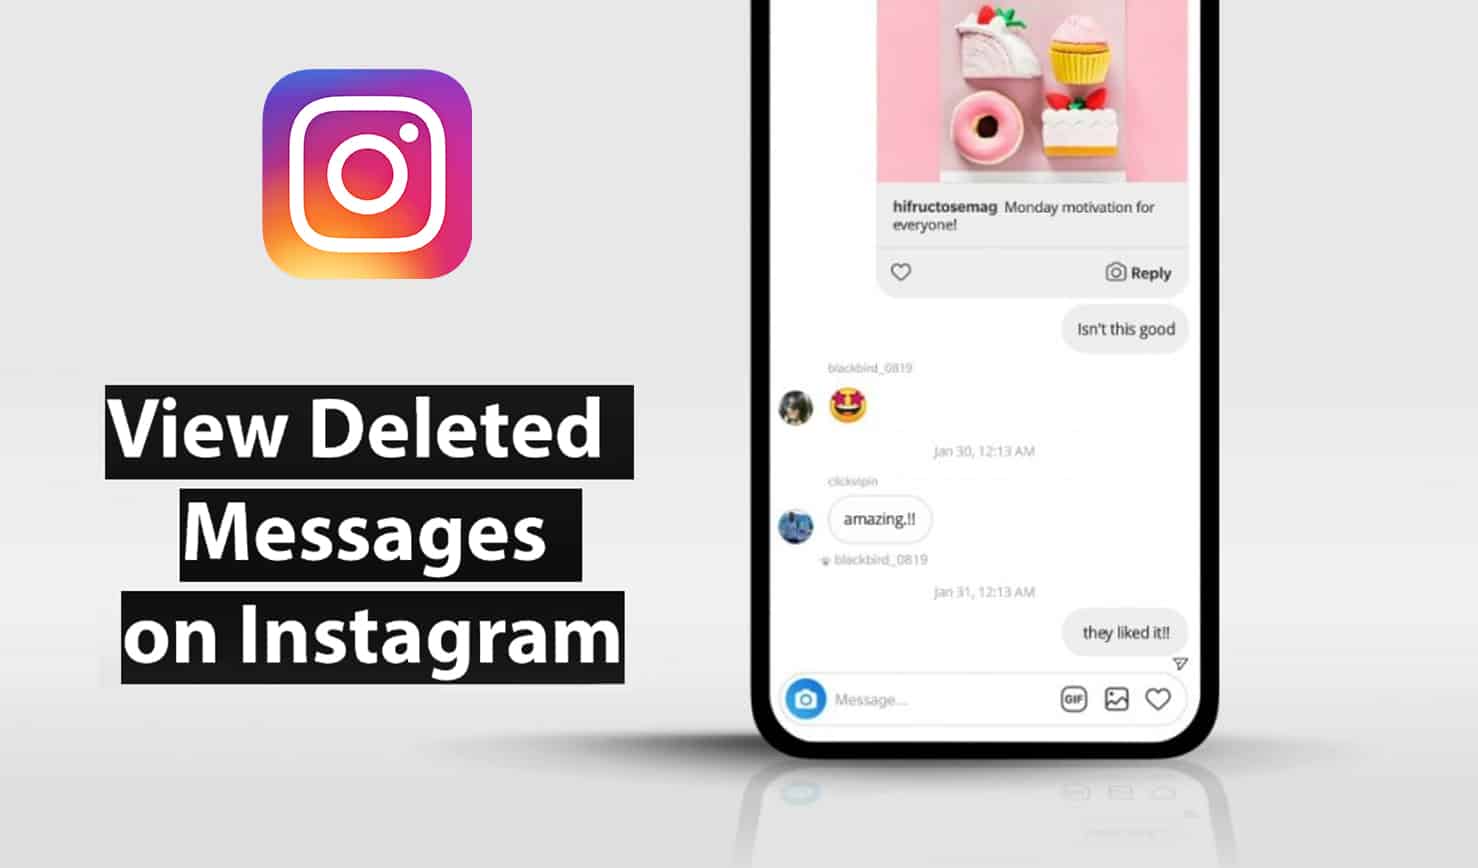 How to View Deleted Messages (Unsend) on Instagram in 2020